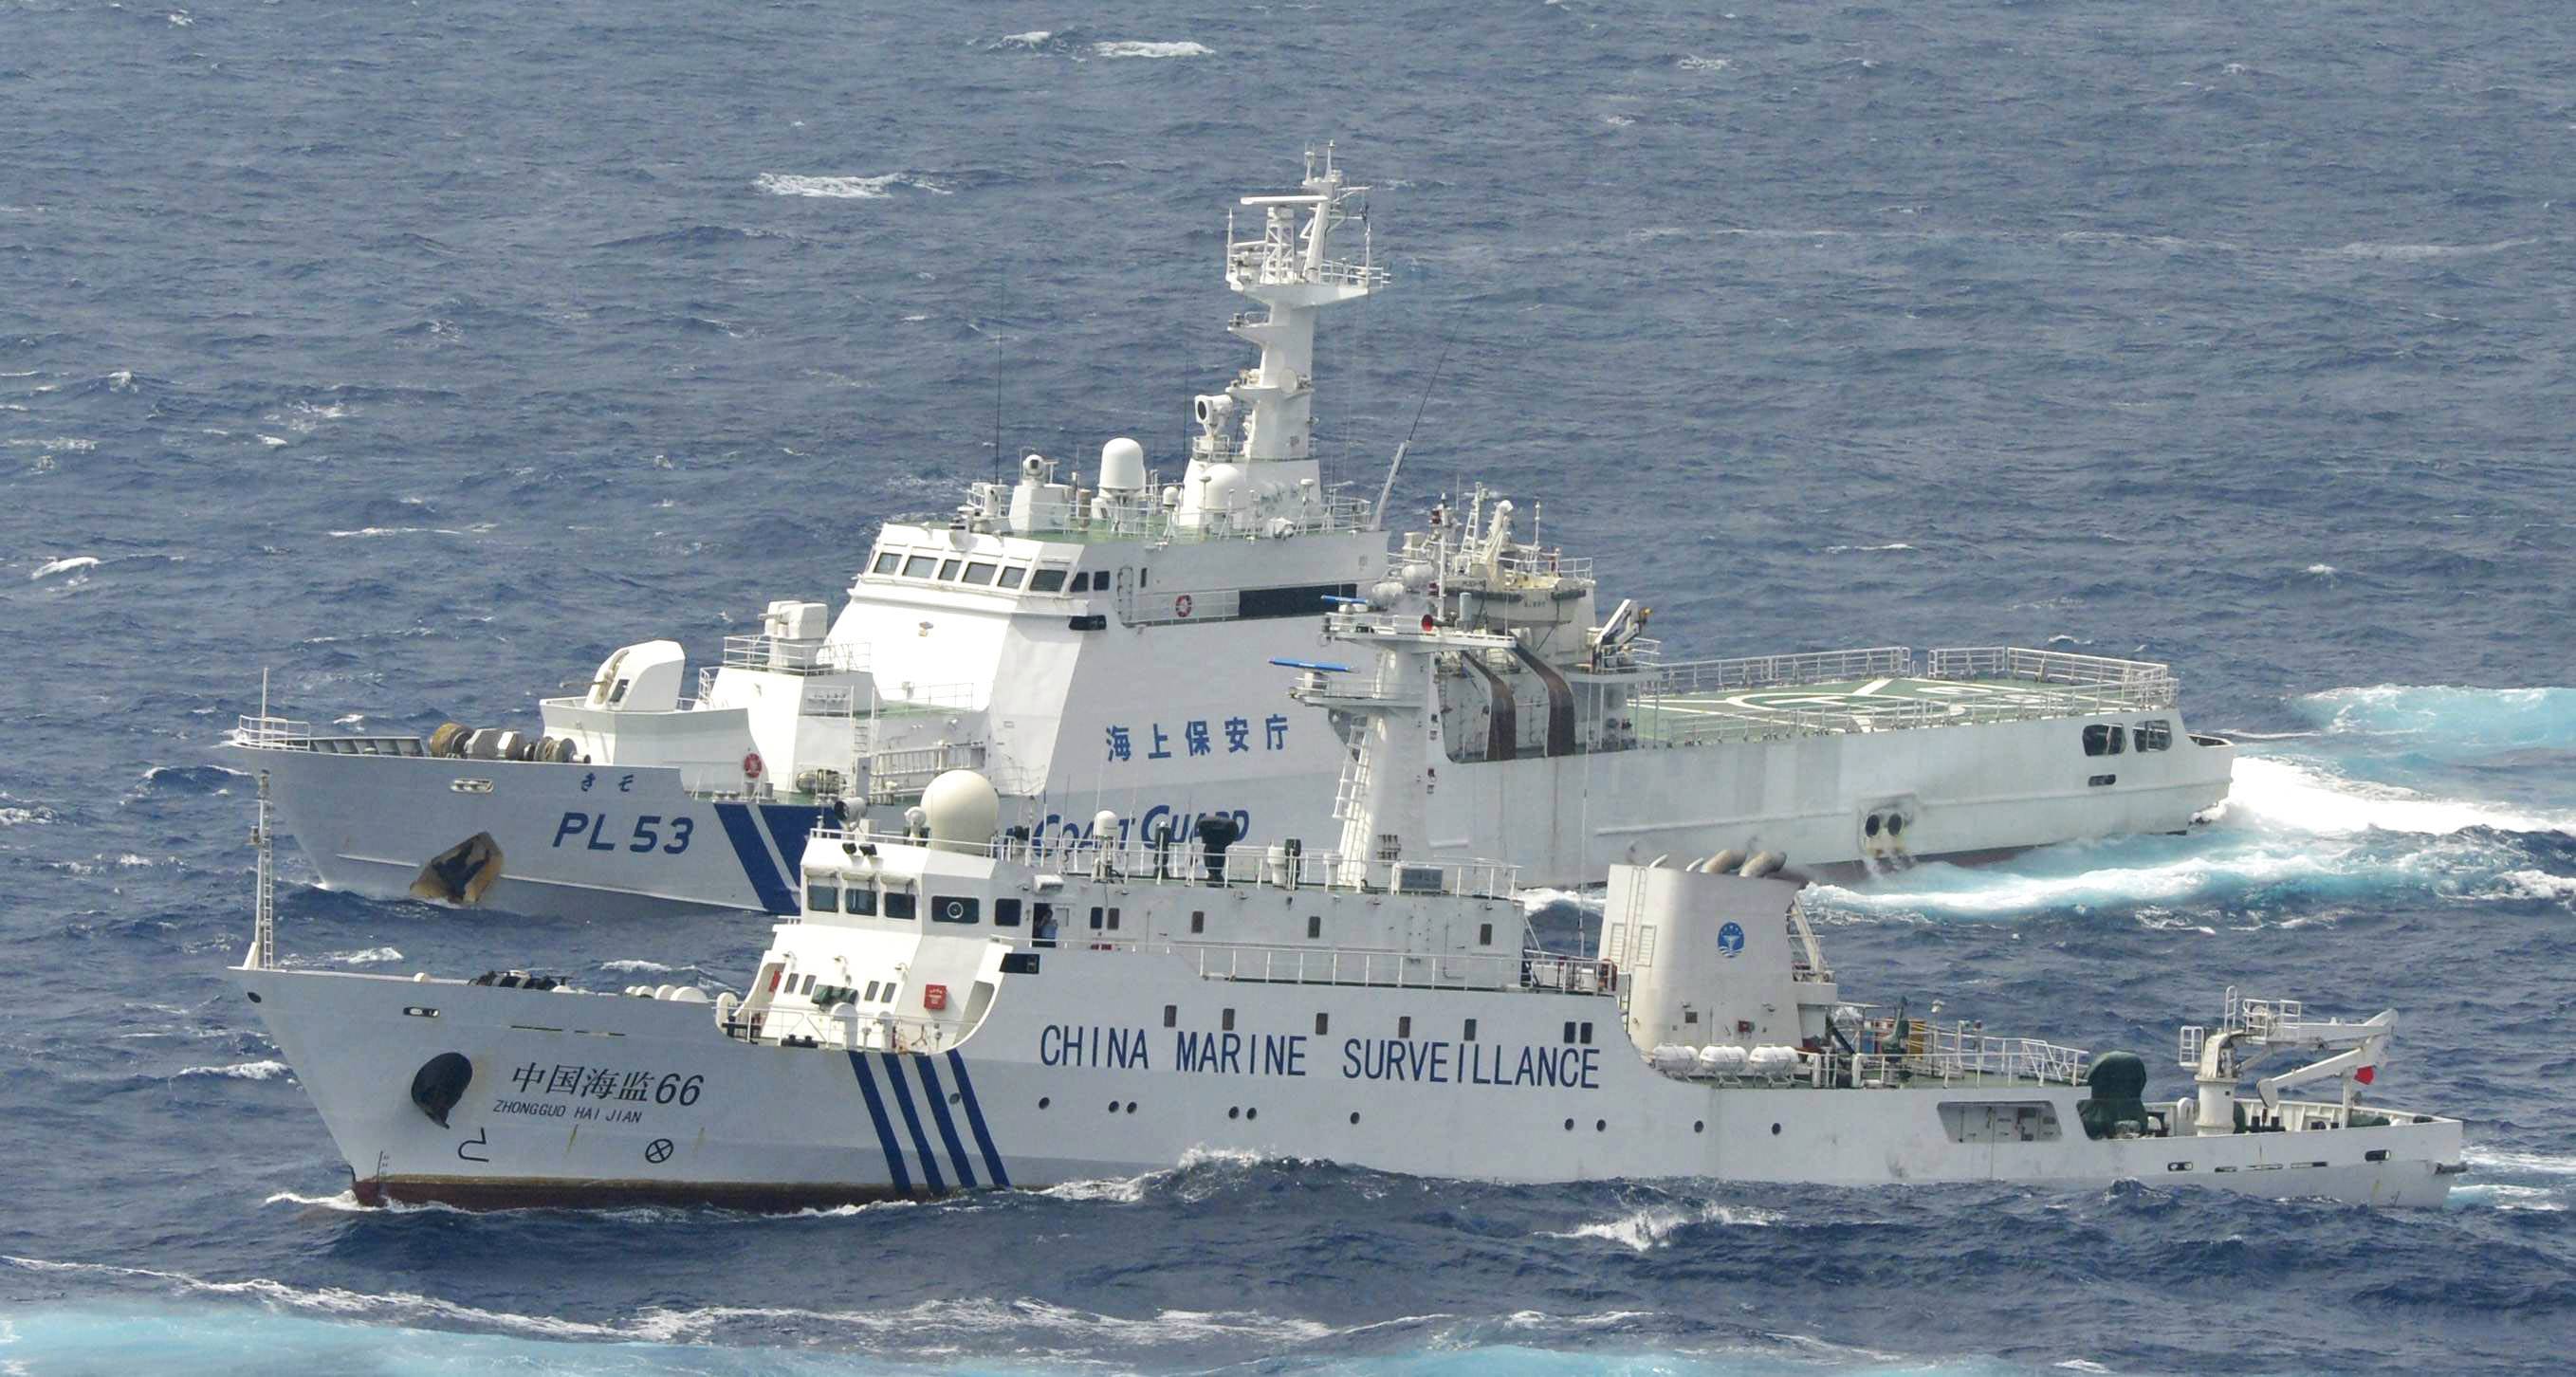 A Chinese marine surveillance vessel sails next to a Japan Coast Guard patrol ship in the East China Sea in September 2012. | KYODO